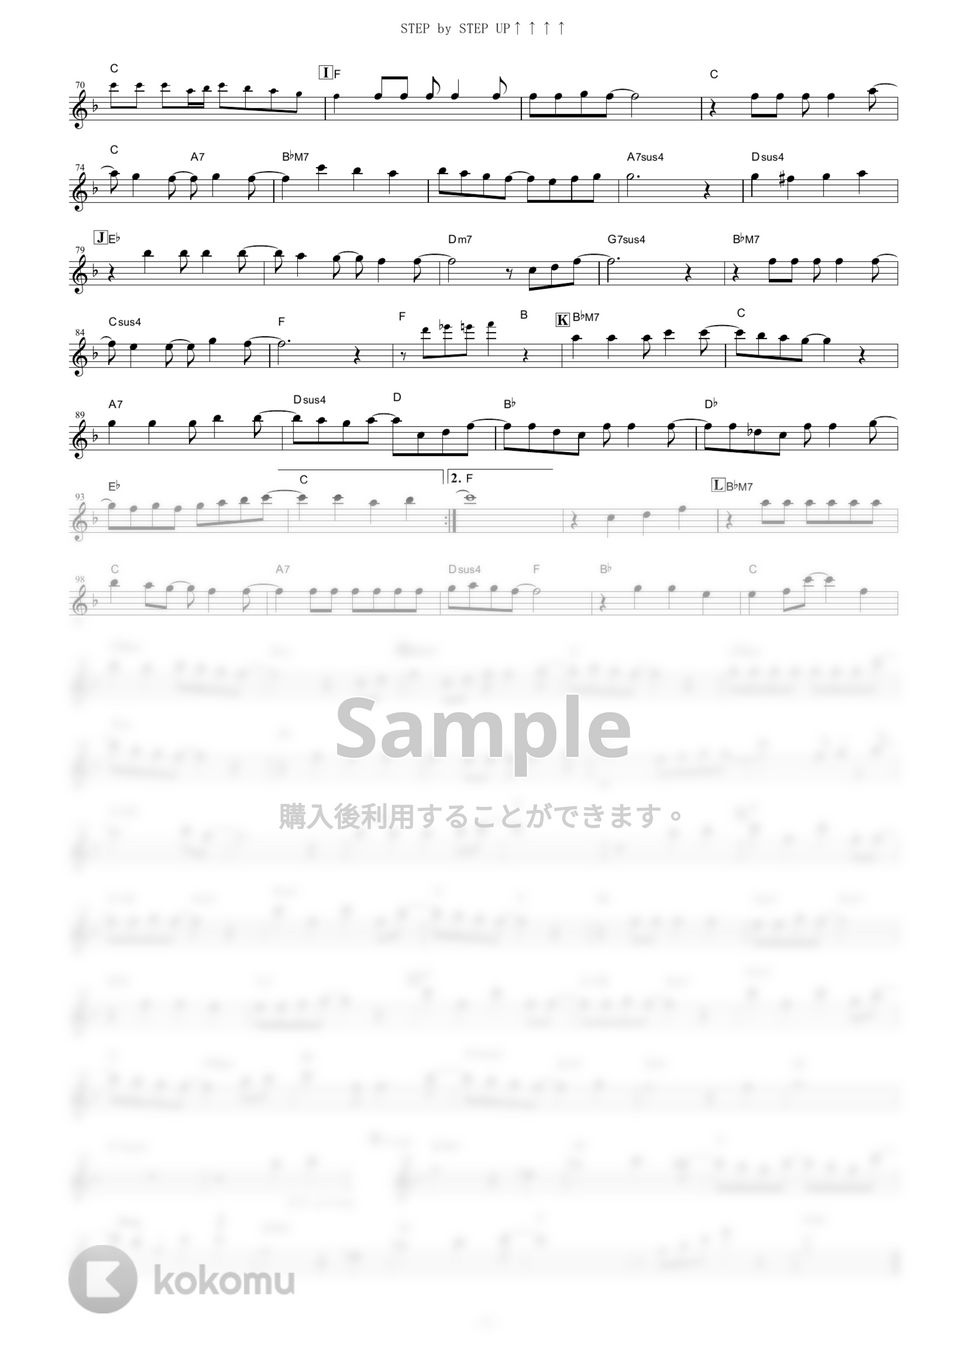 fourfolium - STEP by STEP UP↑↑↑↑ (『NEW GAME!!』 / in C) by muta-sax